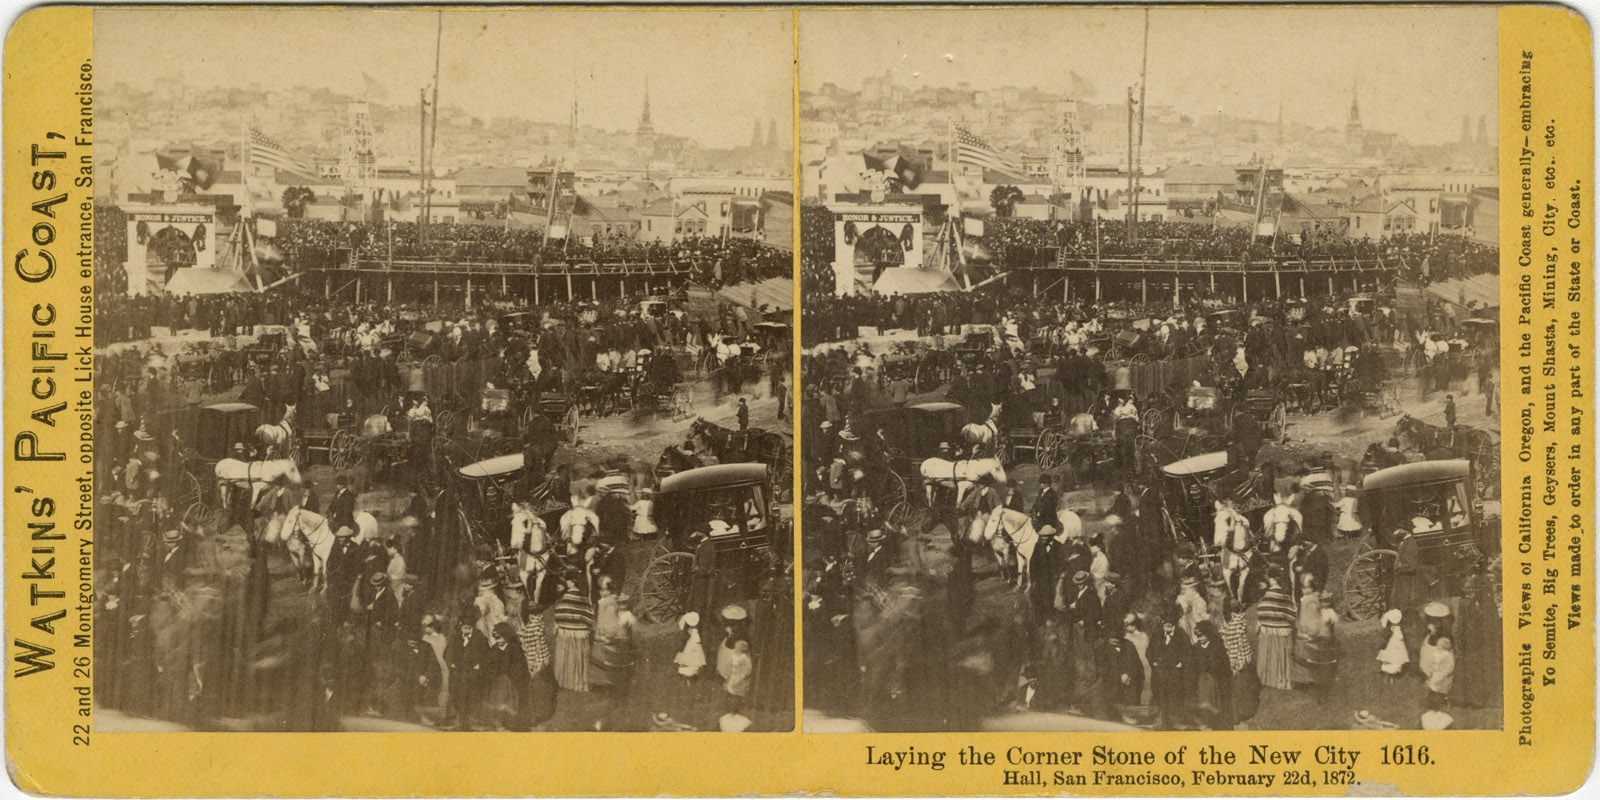 Watkins #1616 - Laying the Corner Stone of the New City Hall, San Francisco, February 22d, 1872